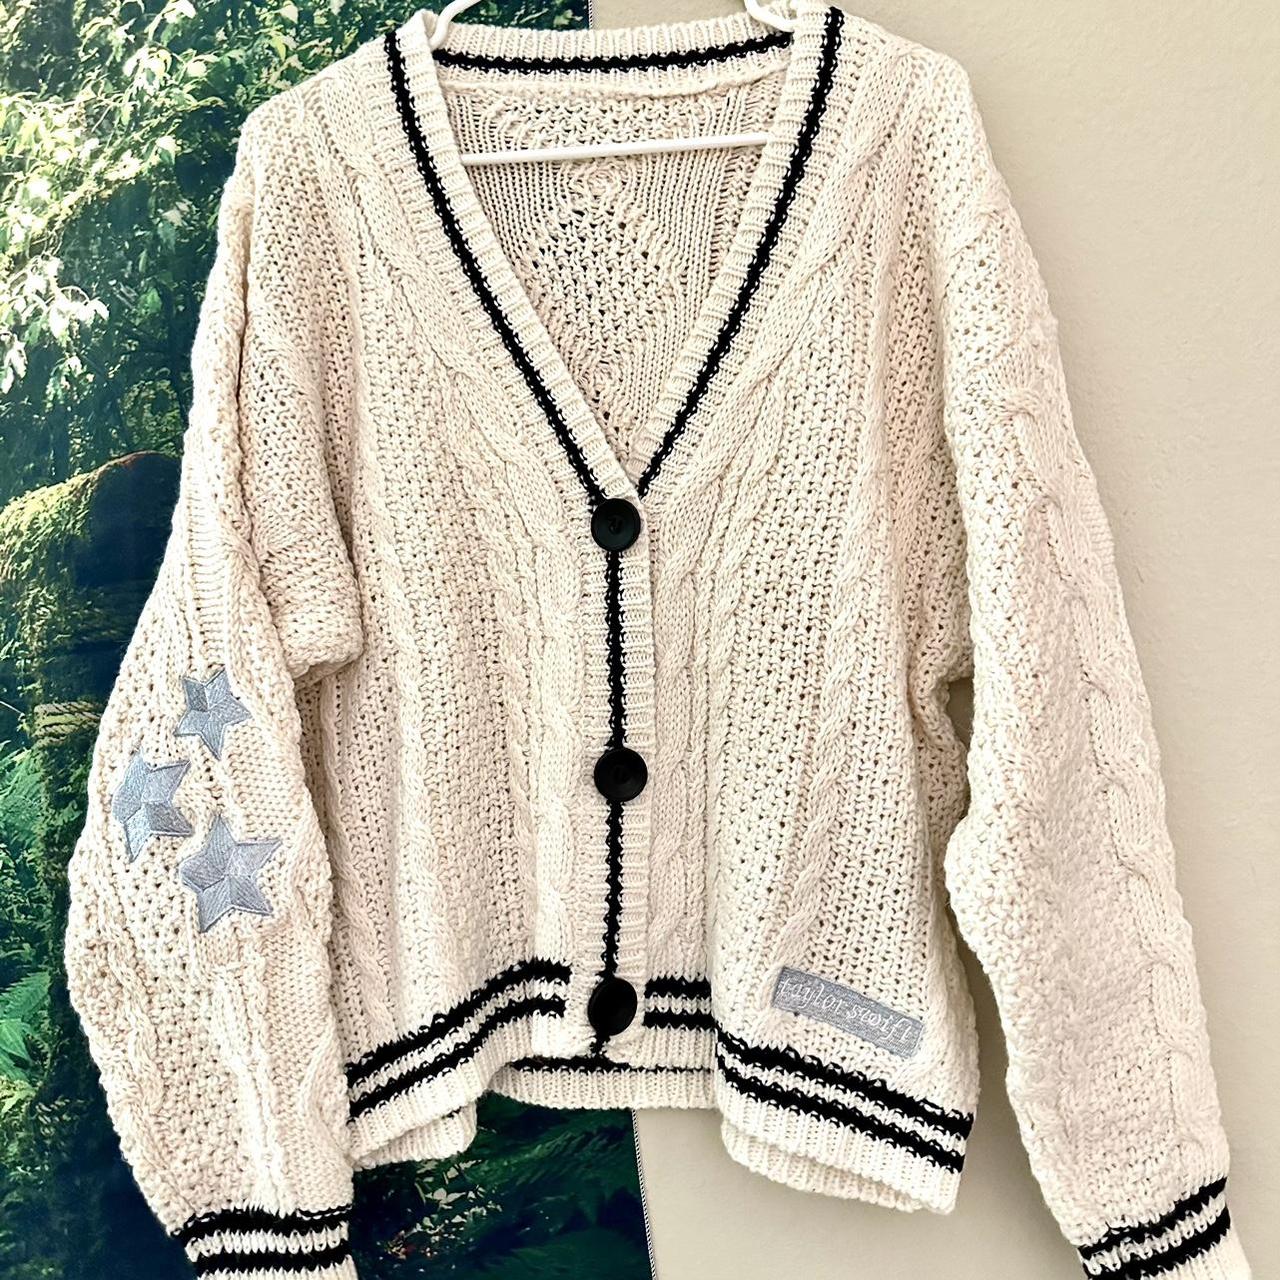 TAYLOR SWIFT THE “CARDIGAN” LIMITED EDITION